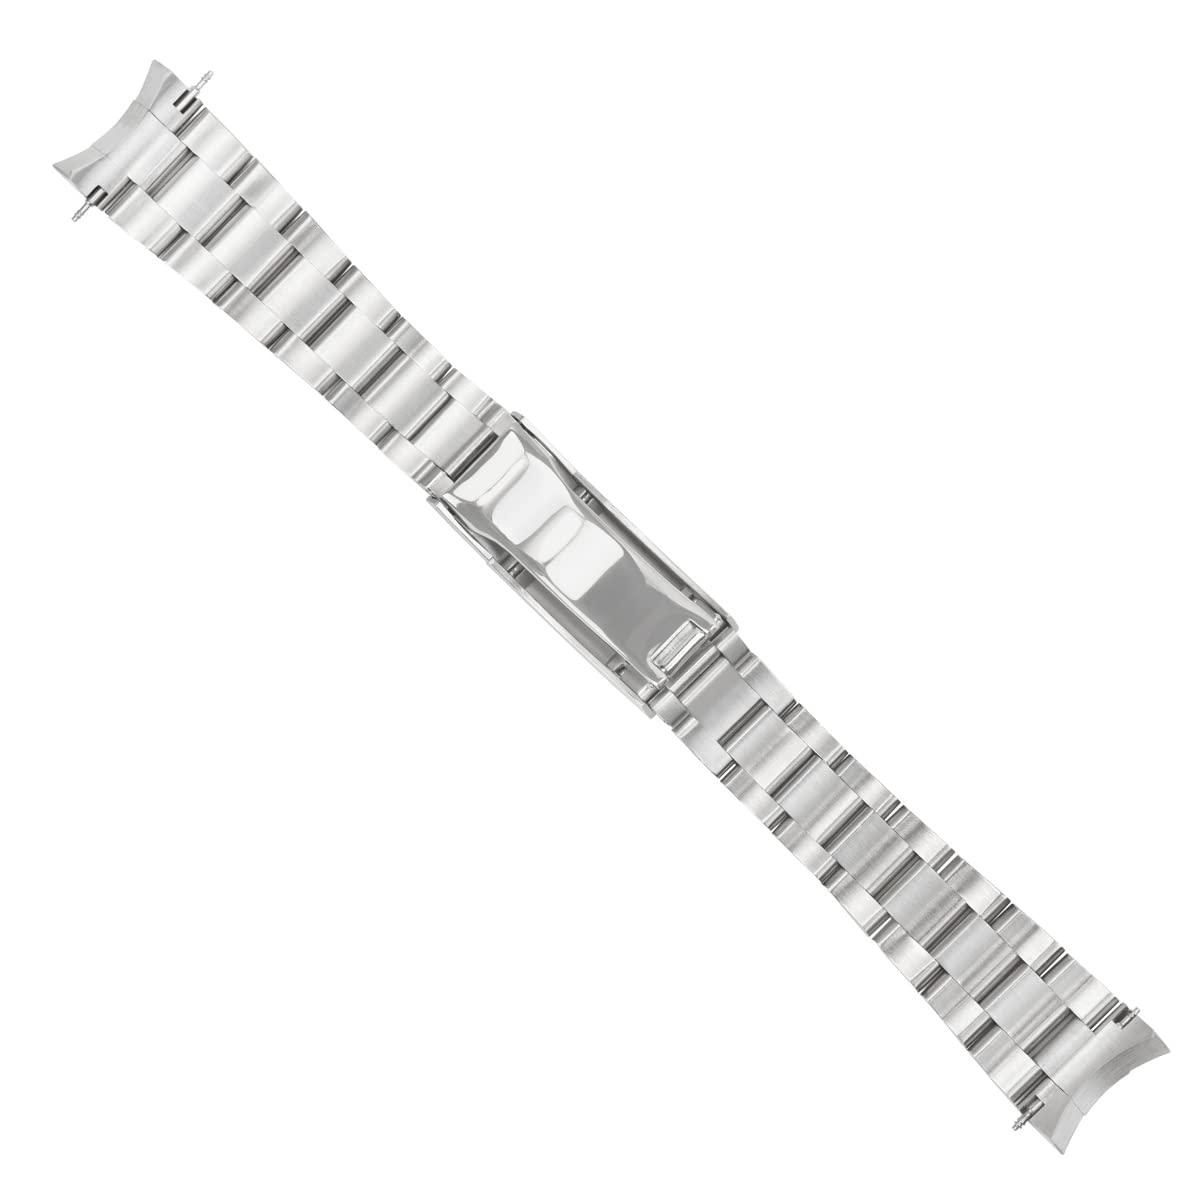 Ewatchparts 21MM OYSTER WATCH BAND GLIDE LOCK COMPATIBLE WITH ROLEX DATEJUST SUBMARINER GMT S/STEEL